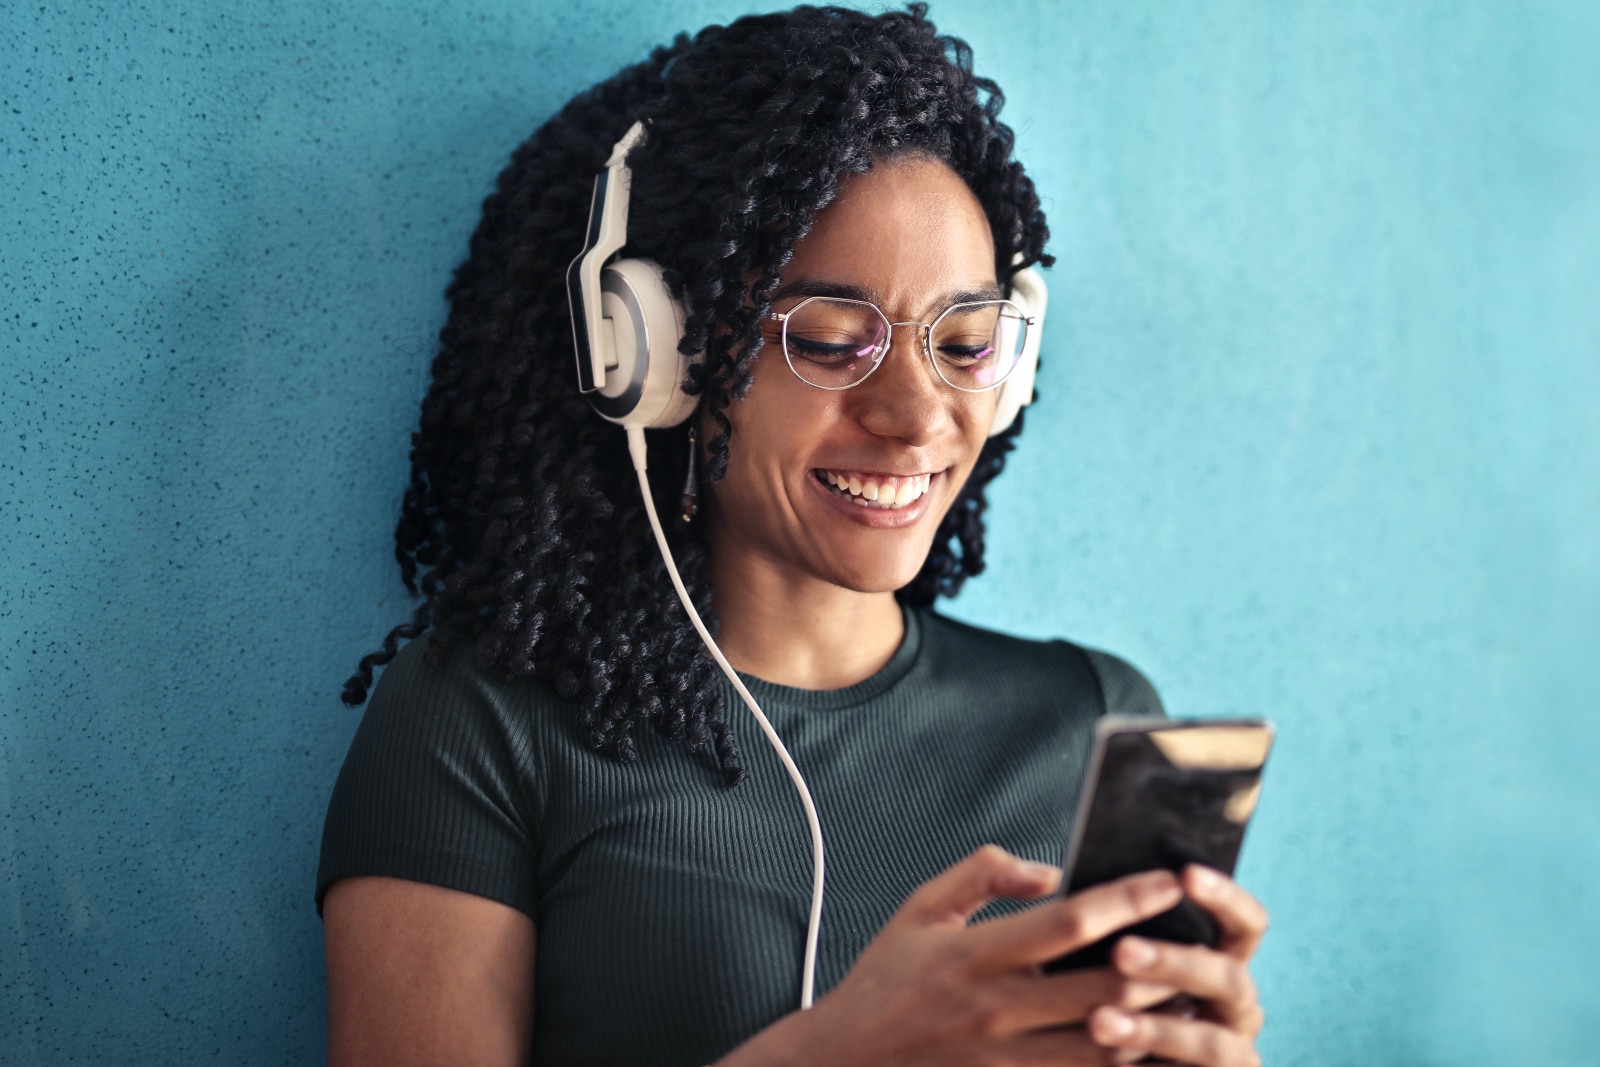 Woman listening to music on her headphones